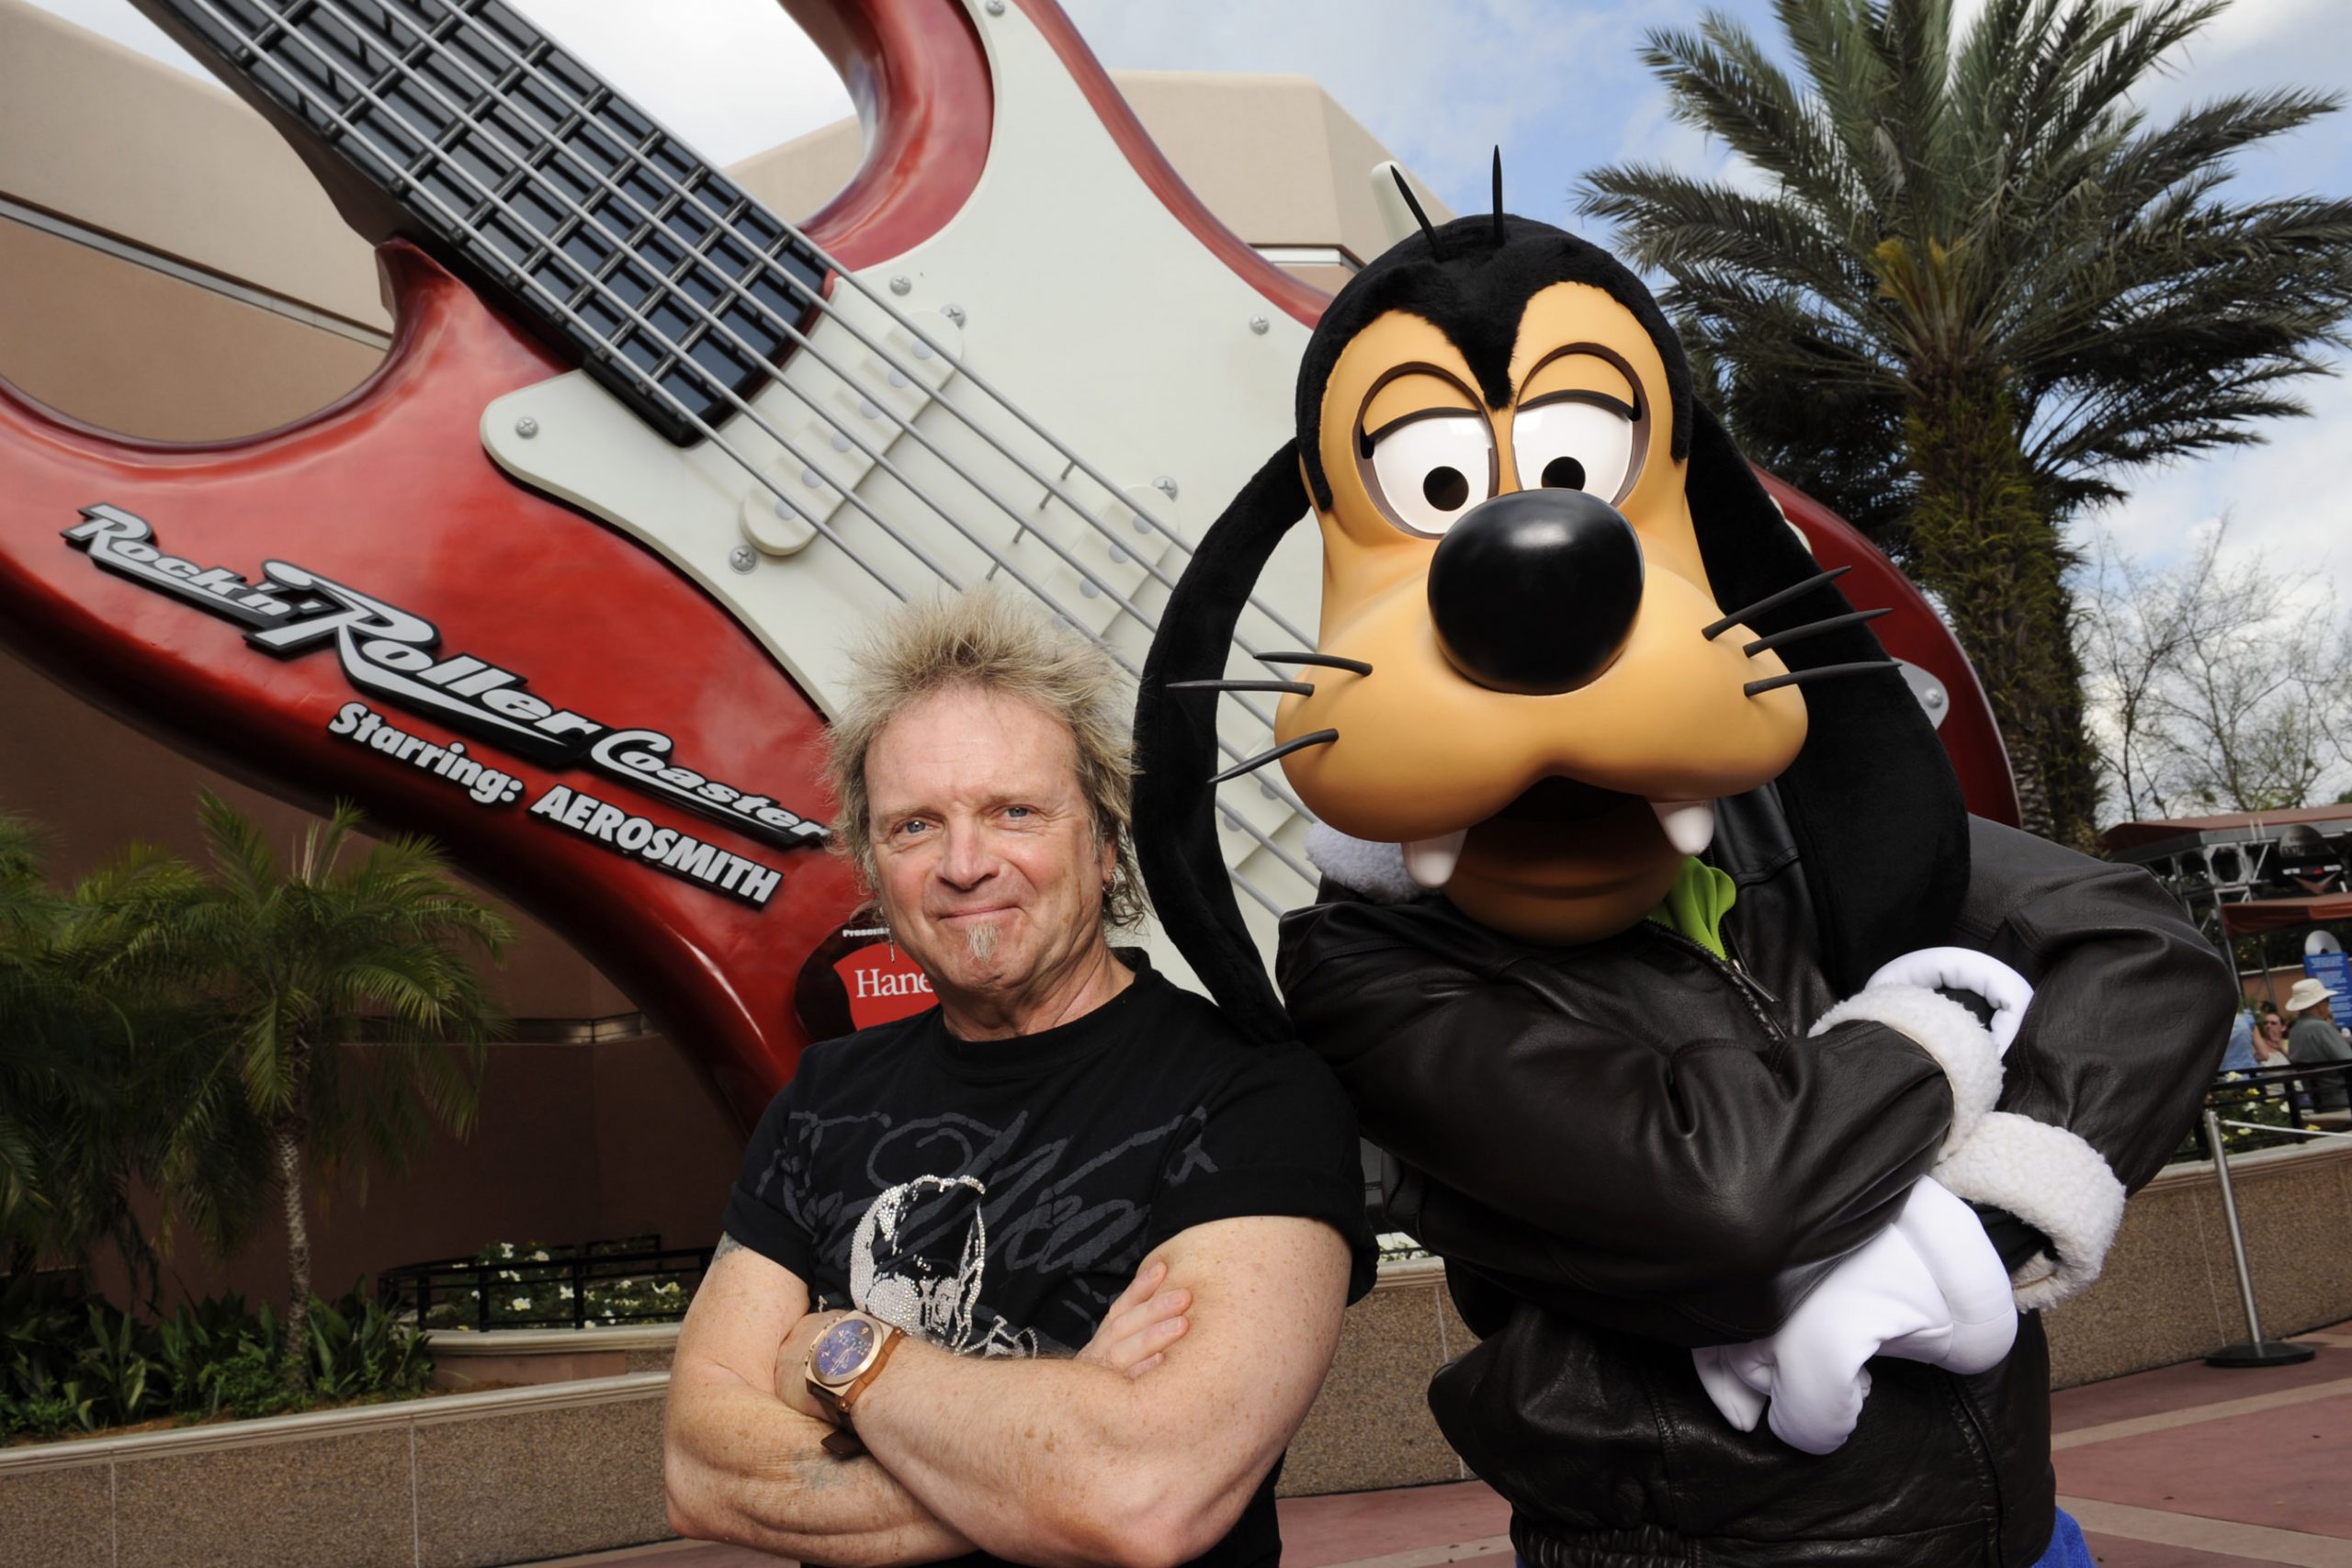 Aerosmith drummer Joey Kramer poses with Disney character Goofy at Disney's Hollywood Studios in front of the 'Rock 'n' Roller Coaster Starring Aerosmith'